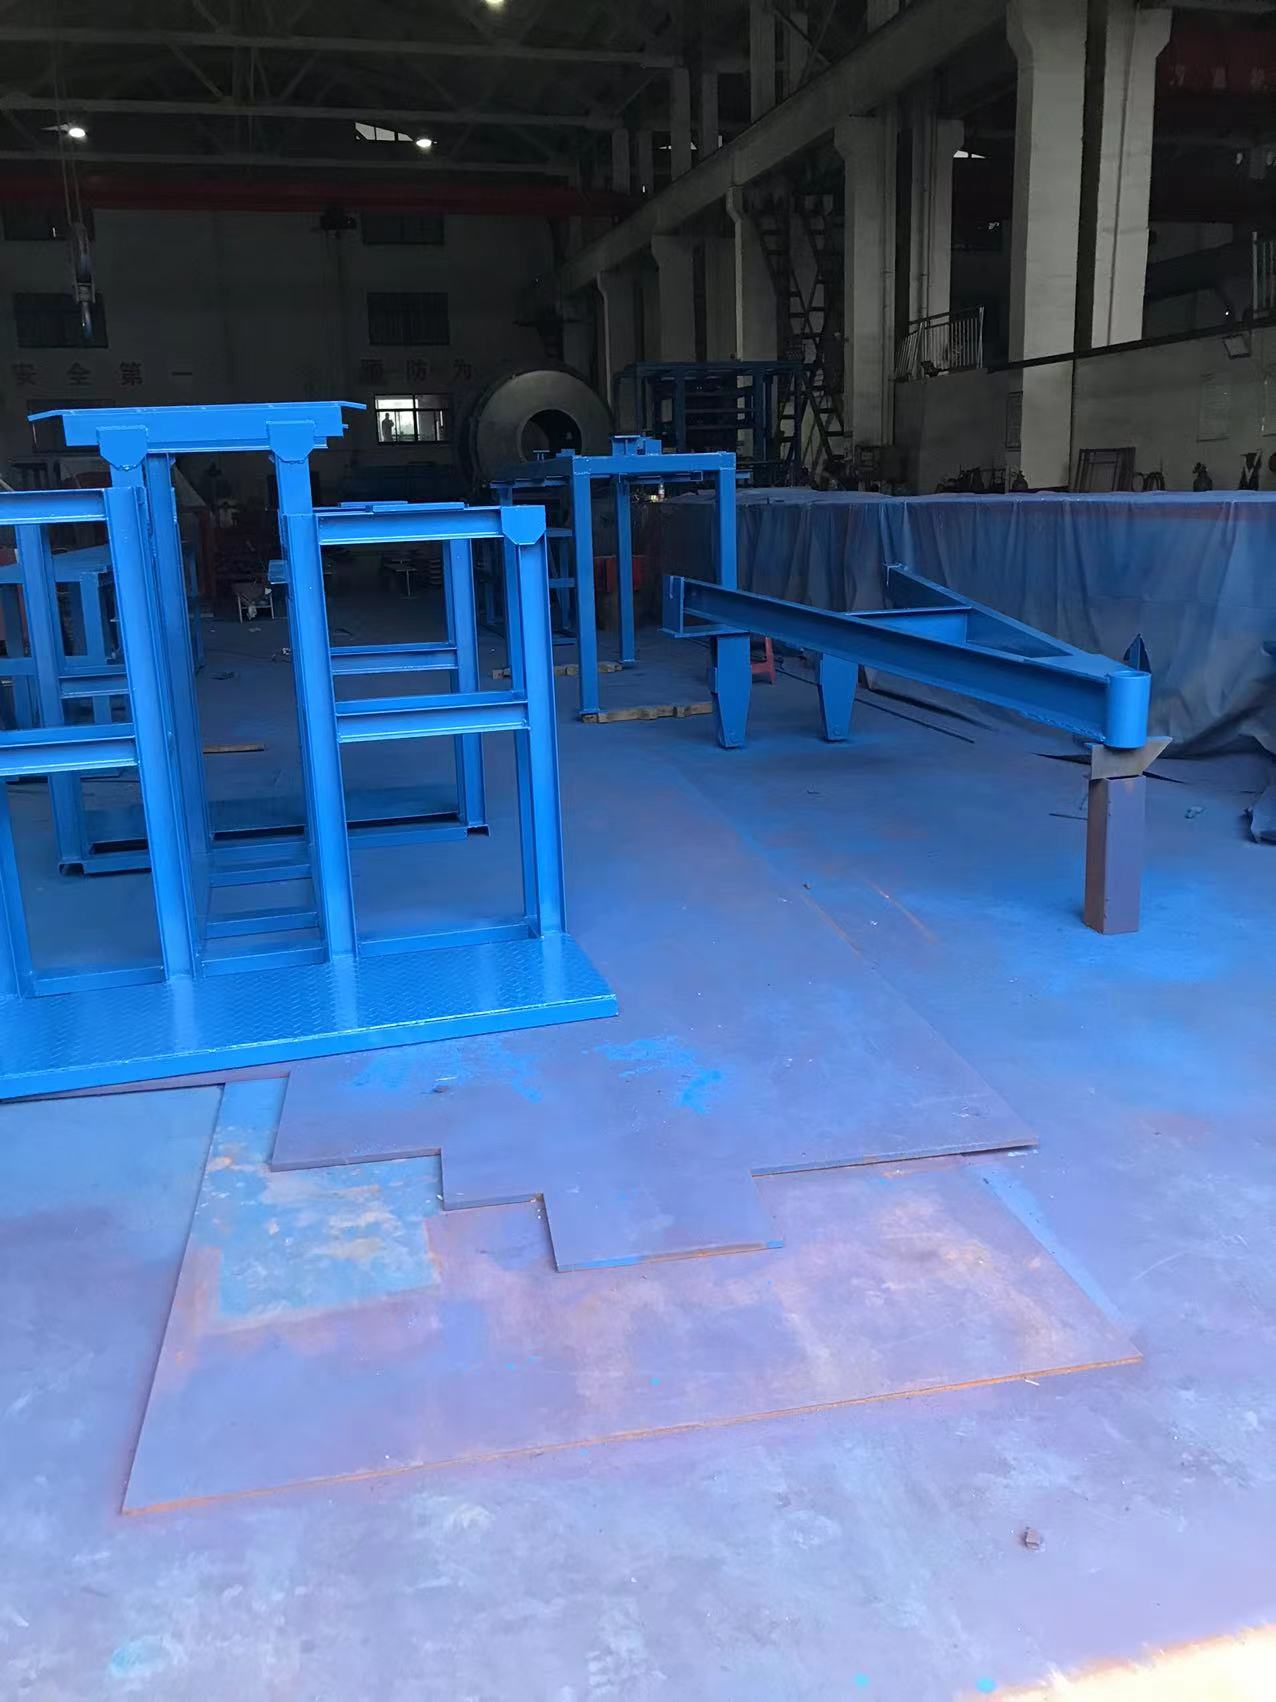 Lead ingot casting machine and crude lead disc round casting machine is ready for delivery this week